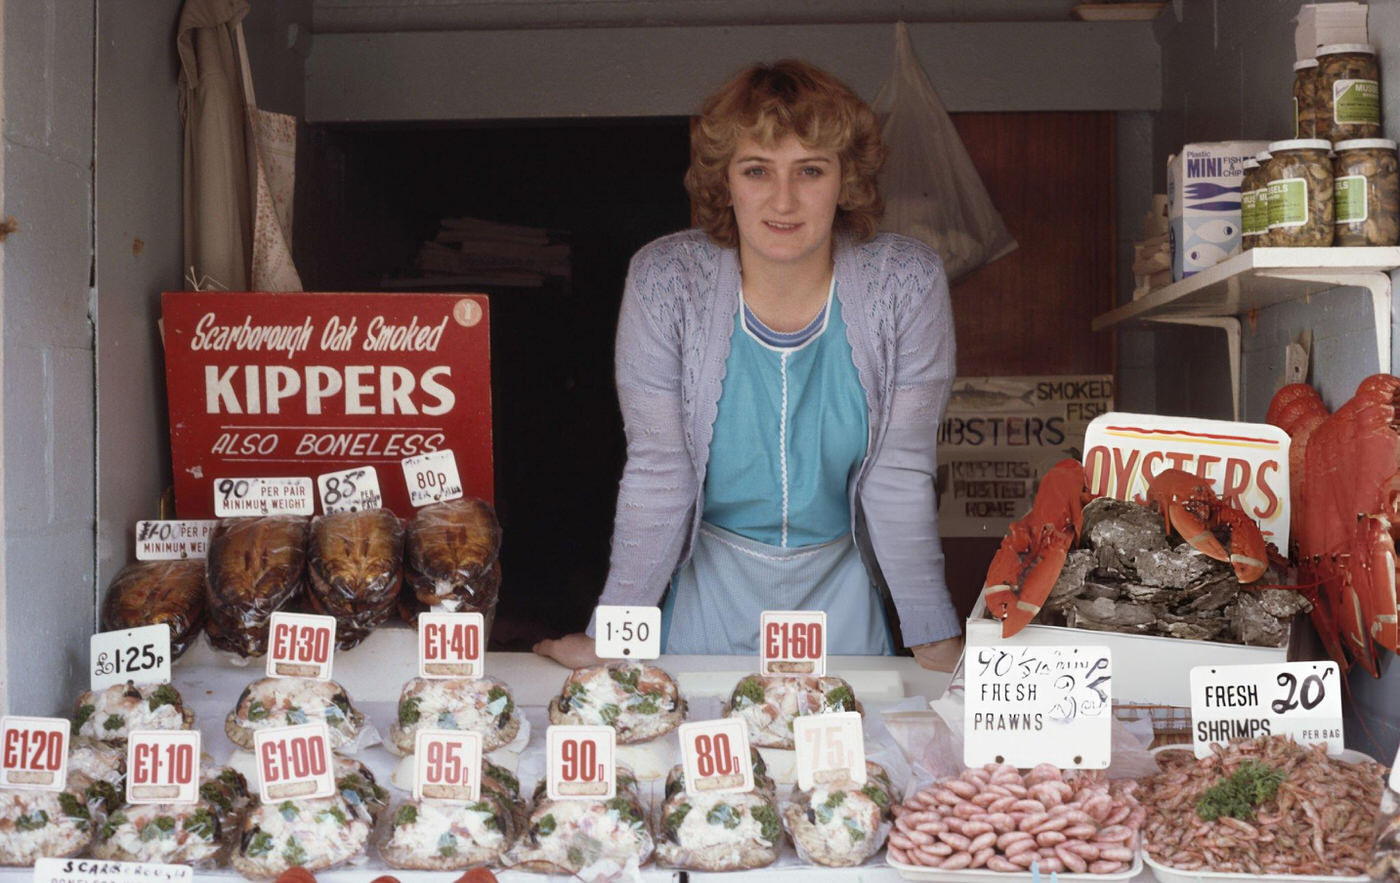 A woman selling fresh seafood in Scarborough, Yorkshire, 1980s.